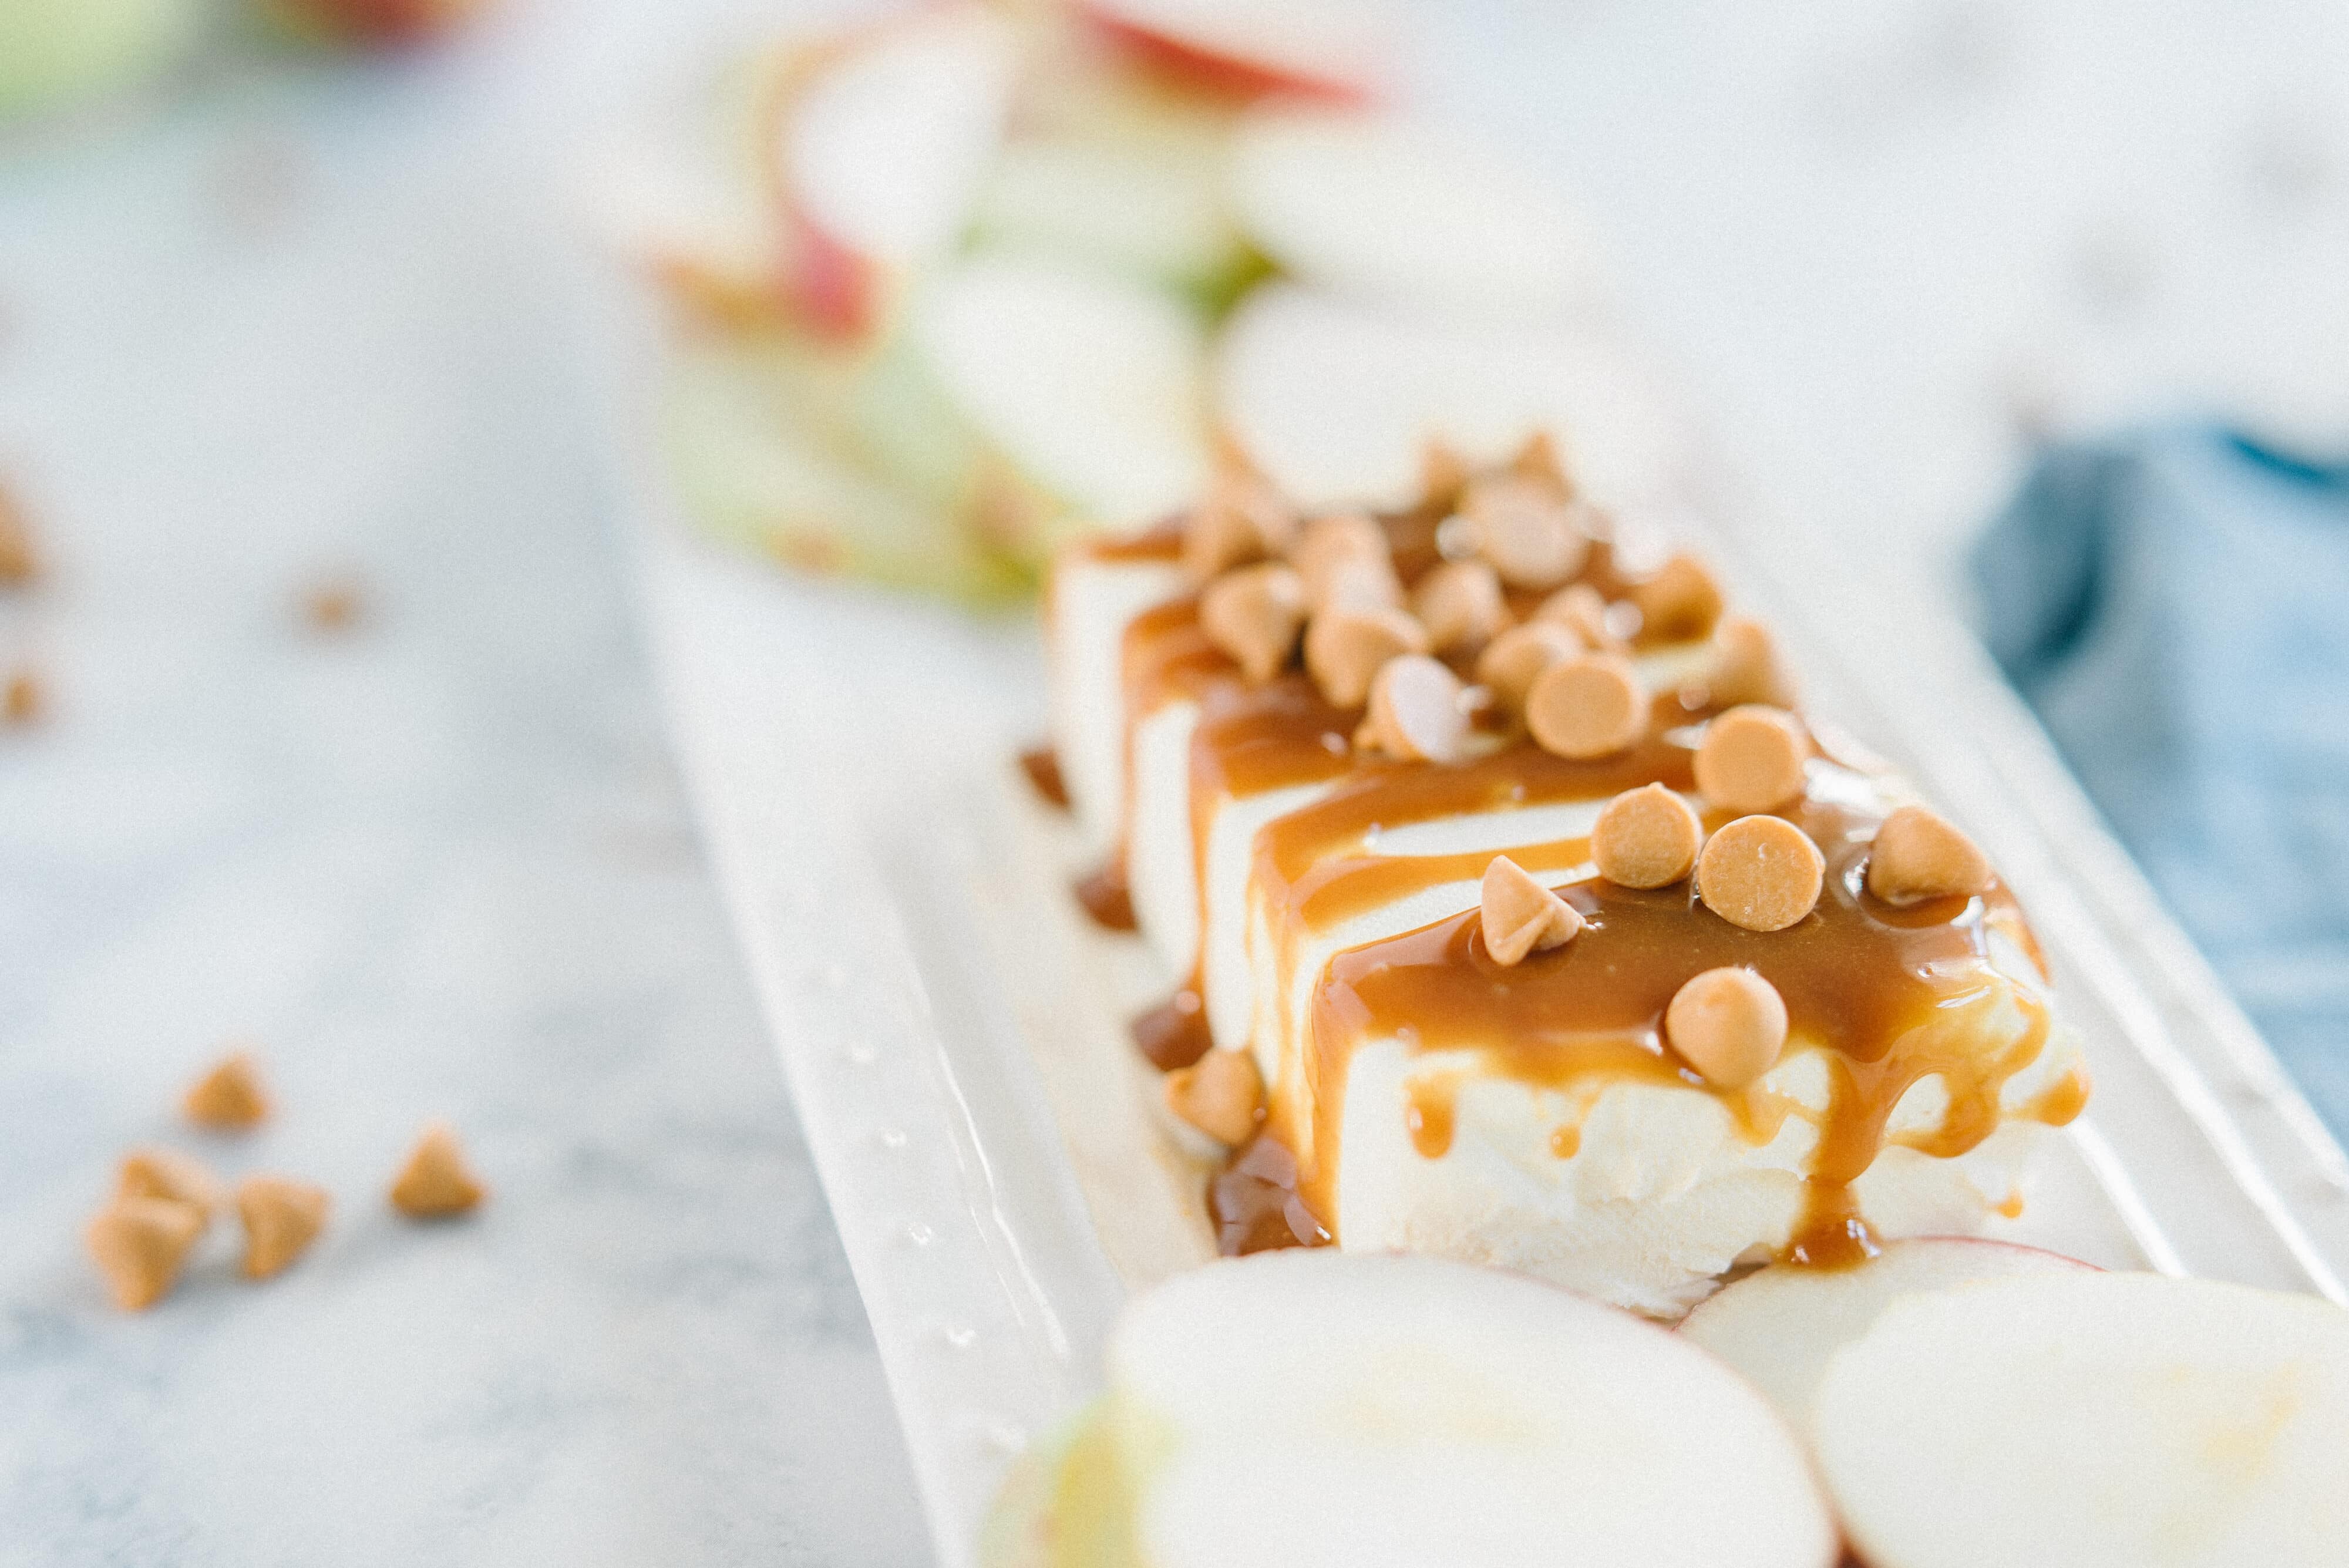 Cream cheese with caramel sauce drizzled on top